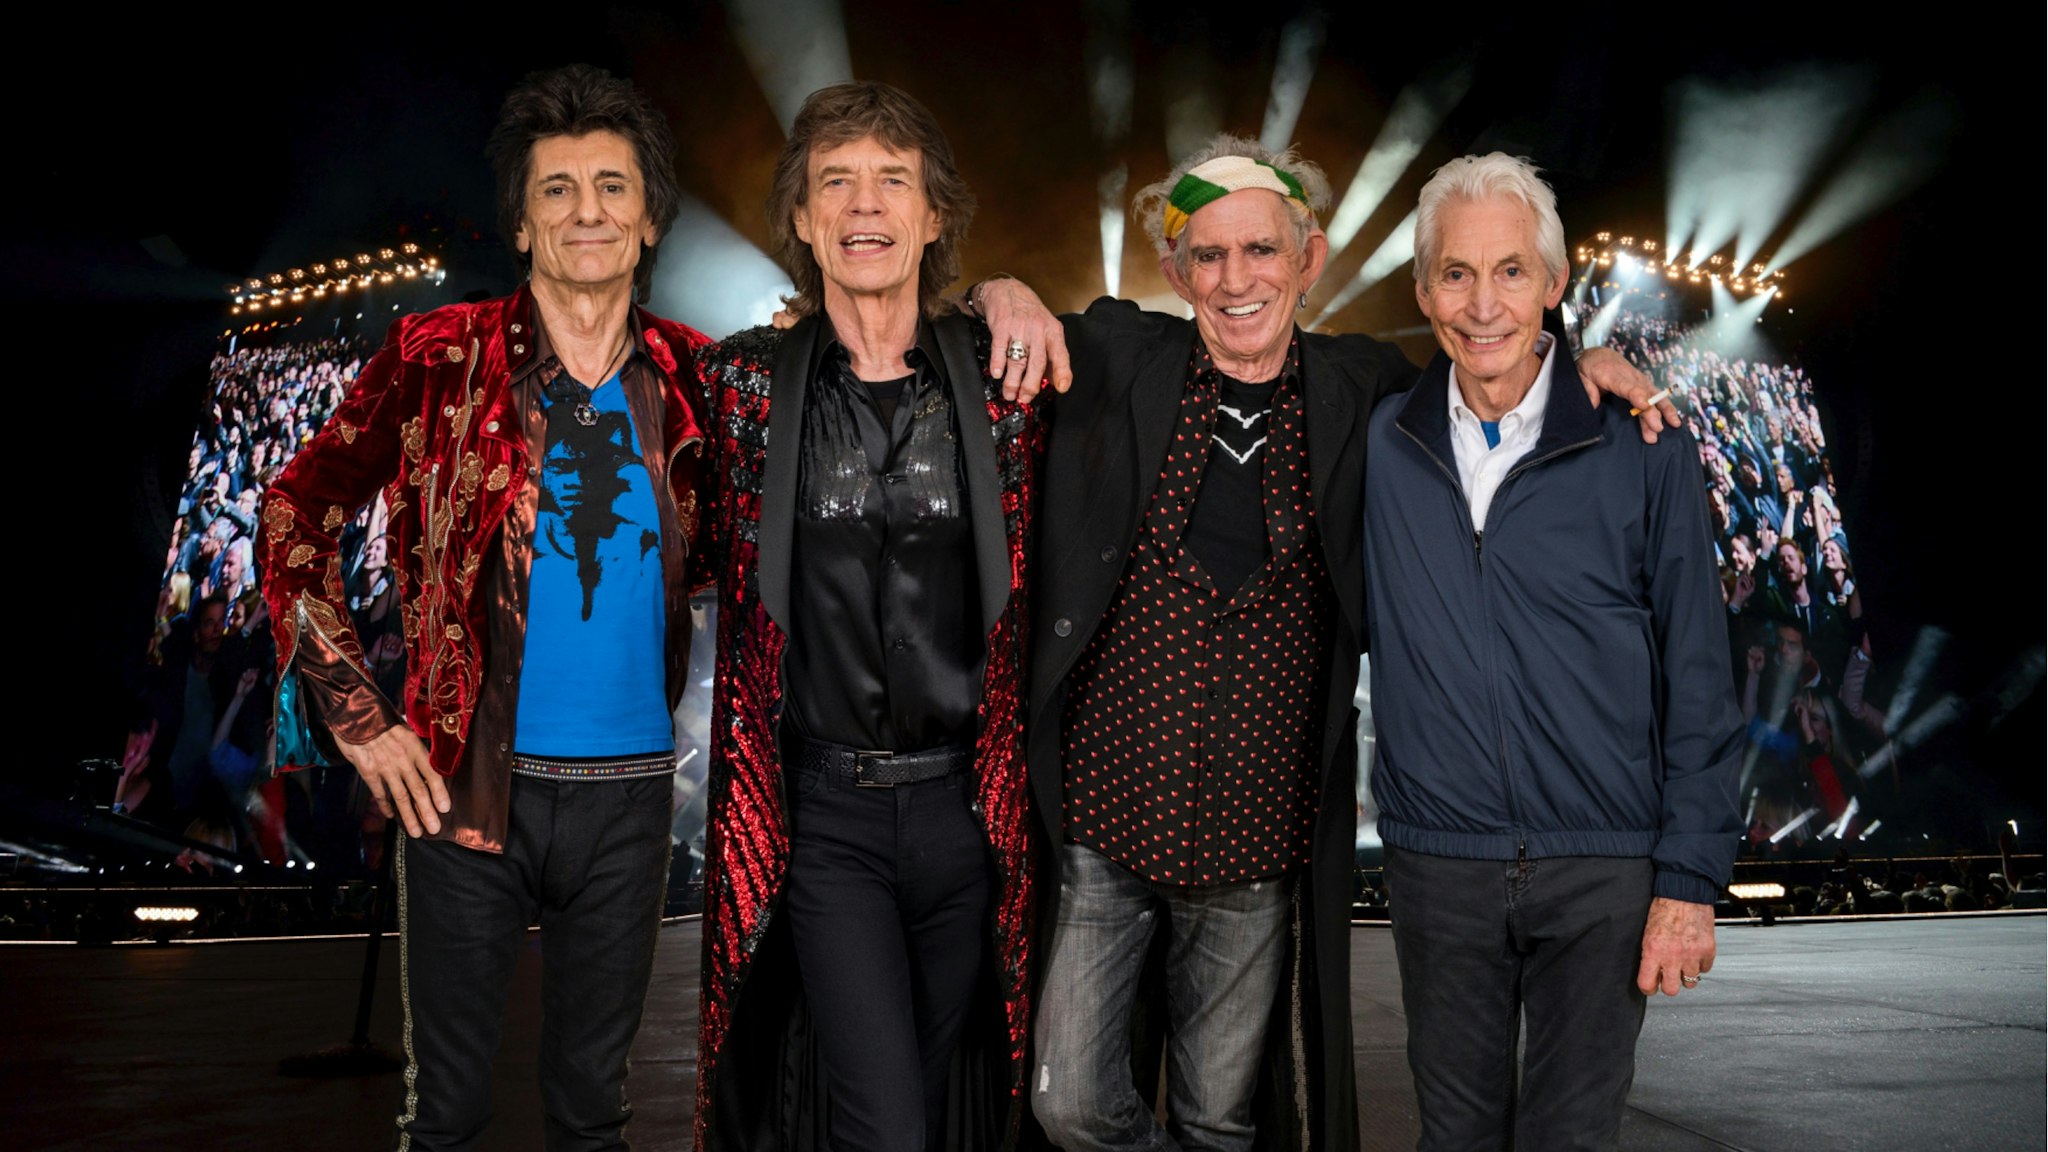 An exclusive image of The Rolling Stones taken on October 25th 2017 in Paris.